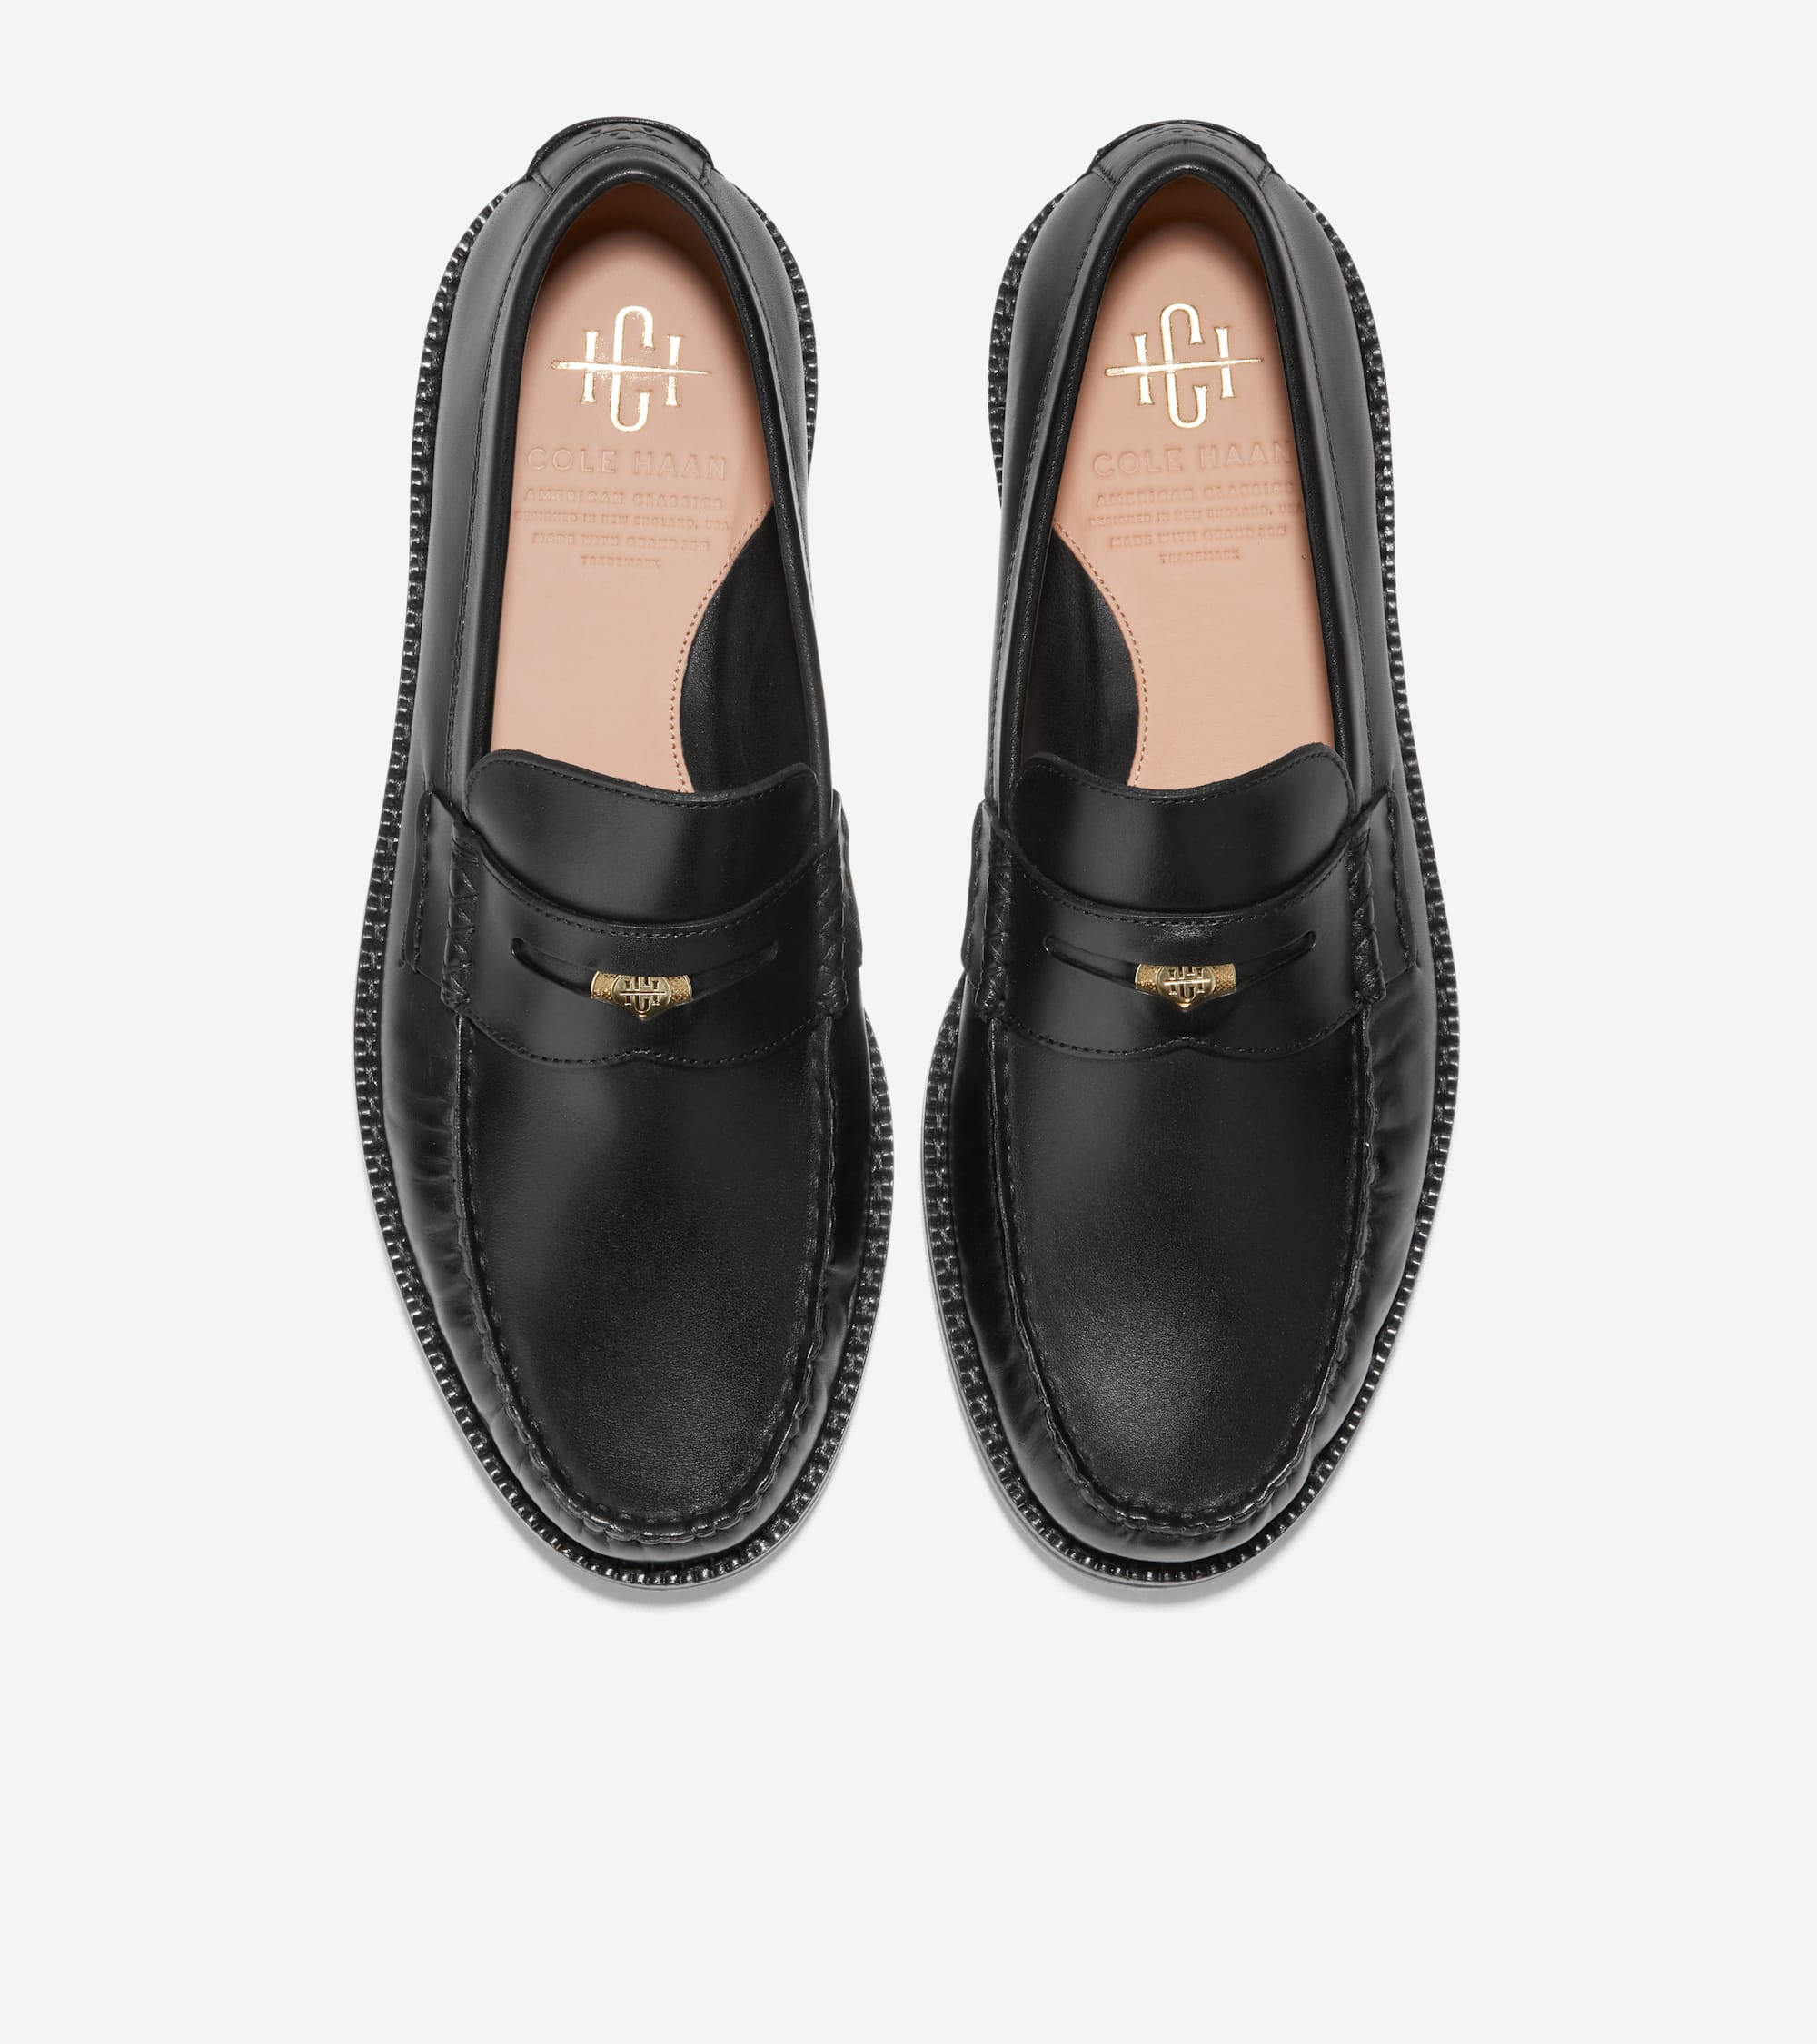 Men's American Classics Pinch Penny Loafer – Cole Haan UK